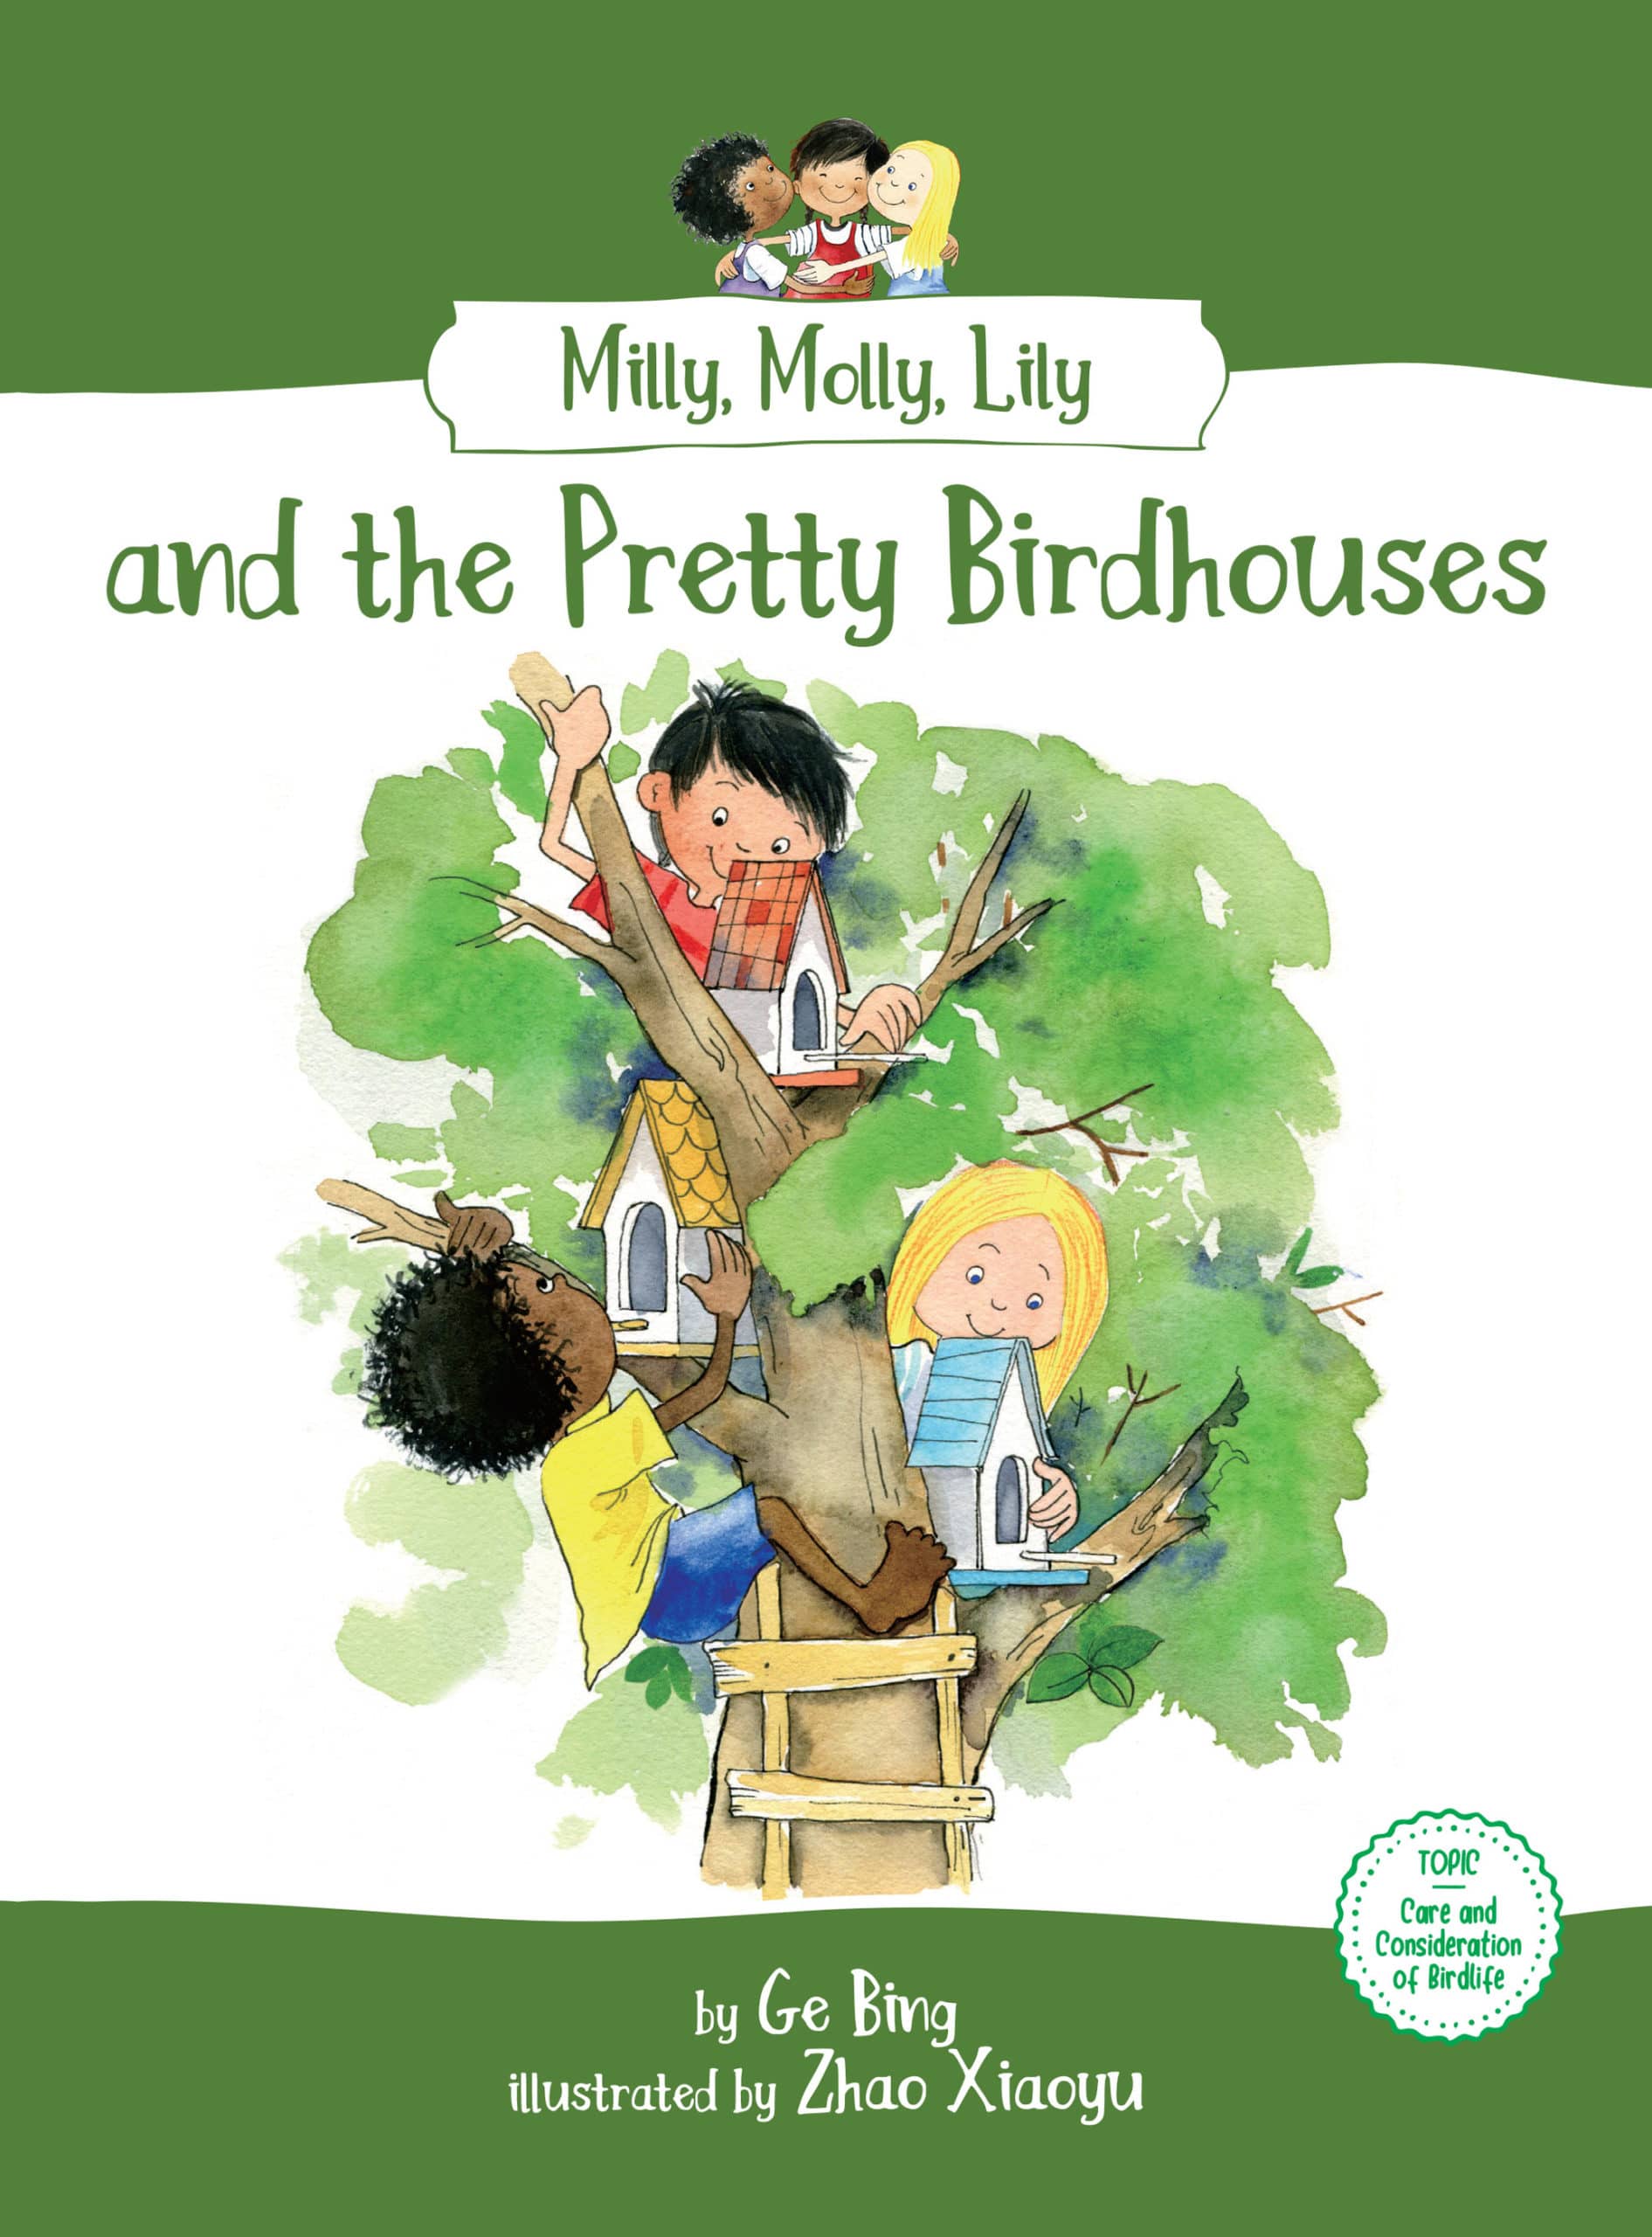 Milly, Molly, Lily and the Pretty Birdhouses book cover